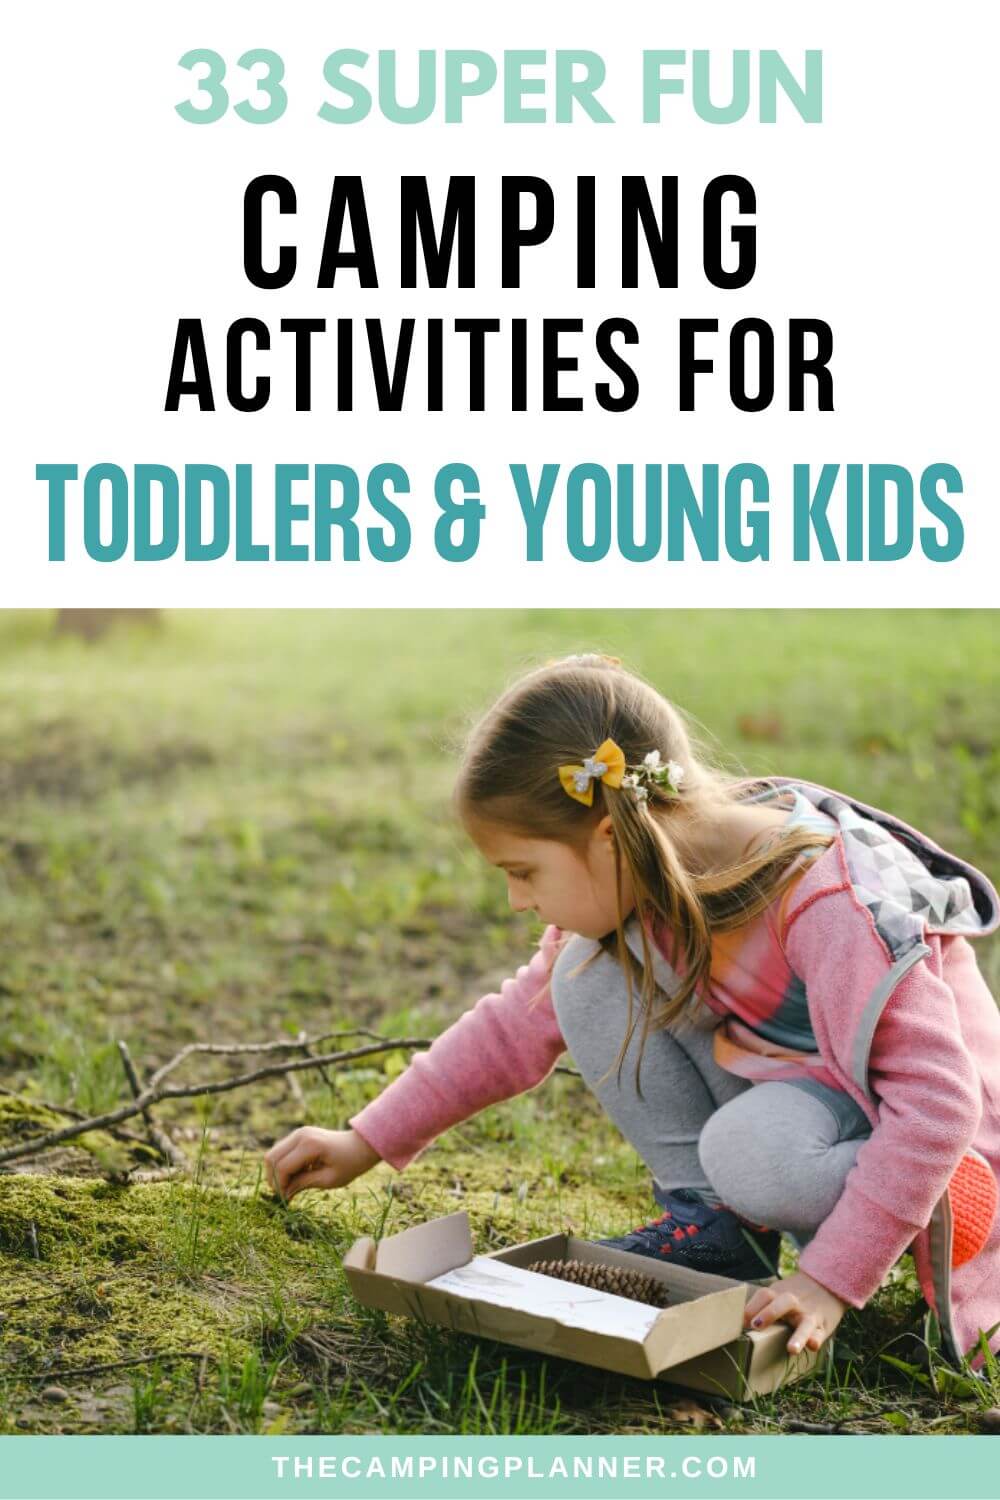 Fun camping activities for toddlers and young kids